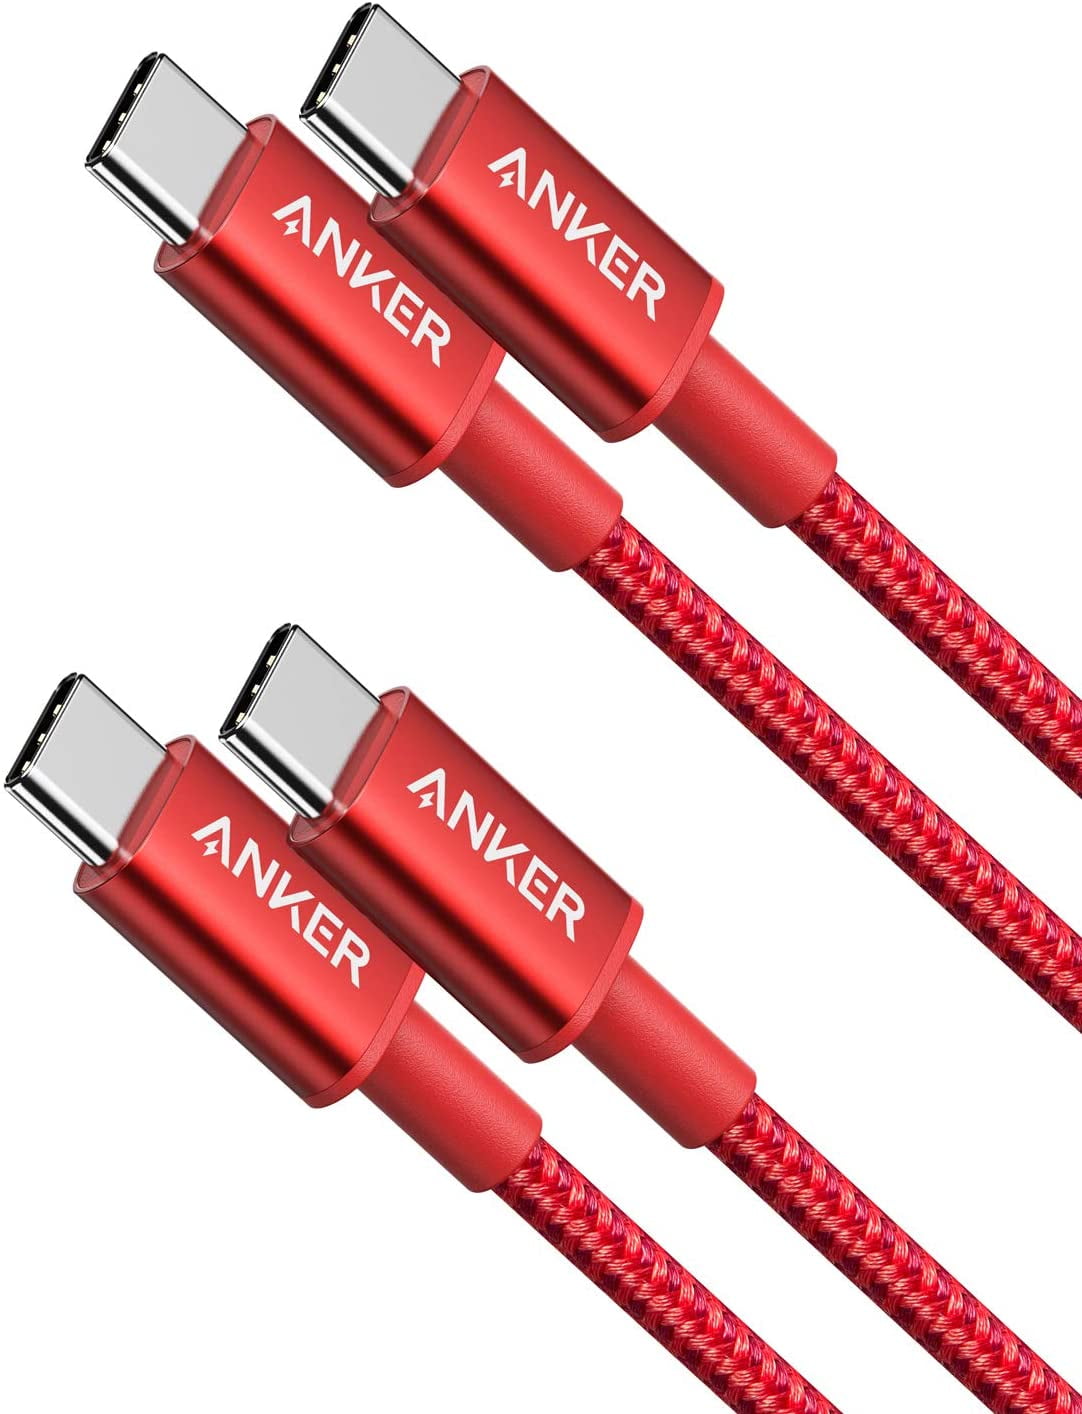 Anker USB C Cable [2-Pack, 3ft], Premium Nylon USB A to Type C Charger  Cable Fast Charging for Samsung Galaxy S10 S10+ / Note 9, LG V30 (USB 2.0